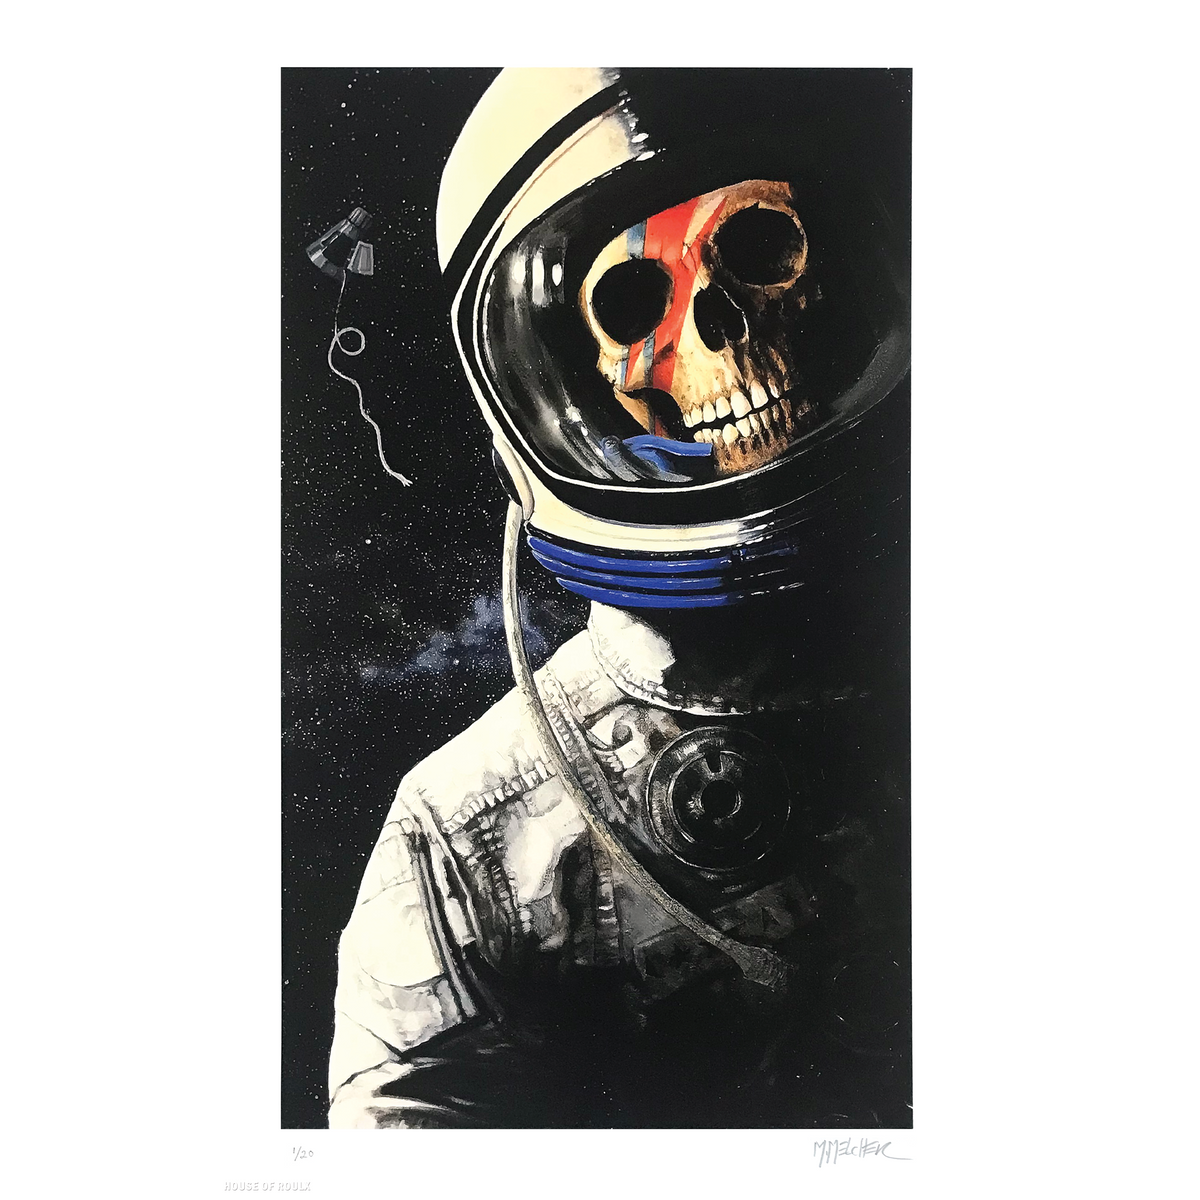 Michele Melcher &quot;Space Oddity&quot; - Archival Print, Limited Edition of 20 - 11 x 17&quot;